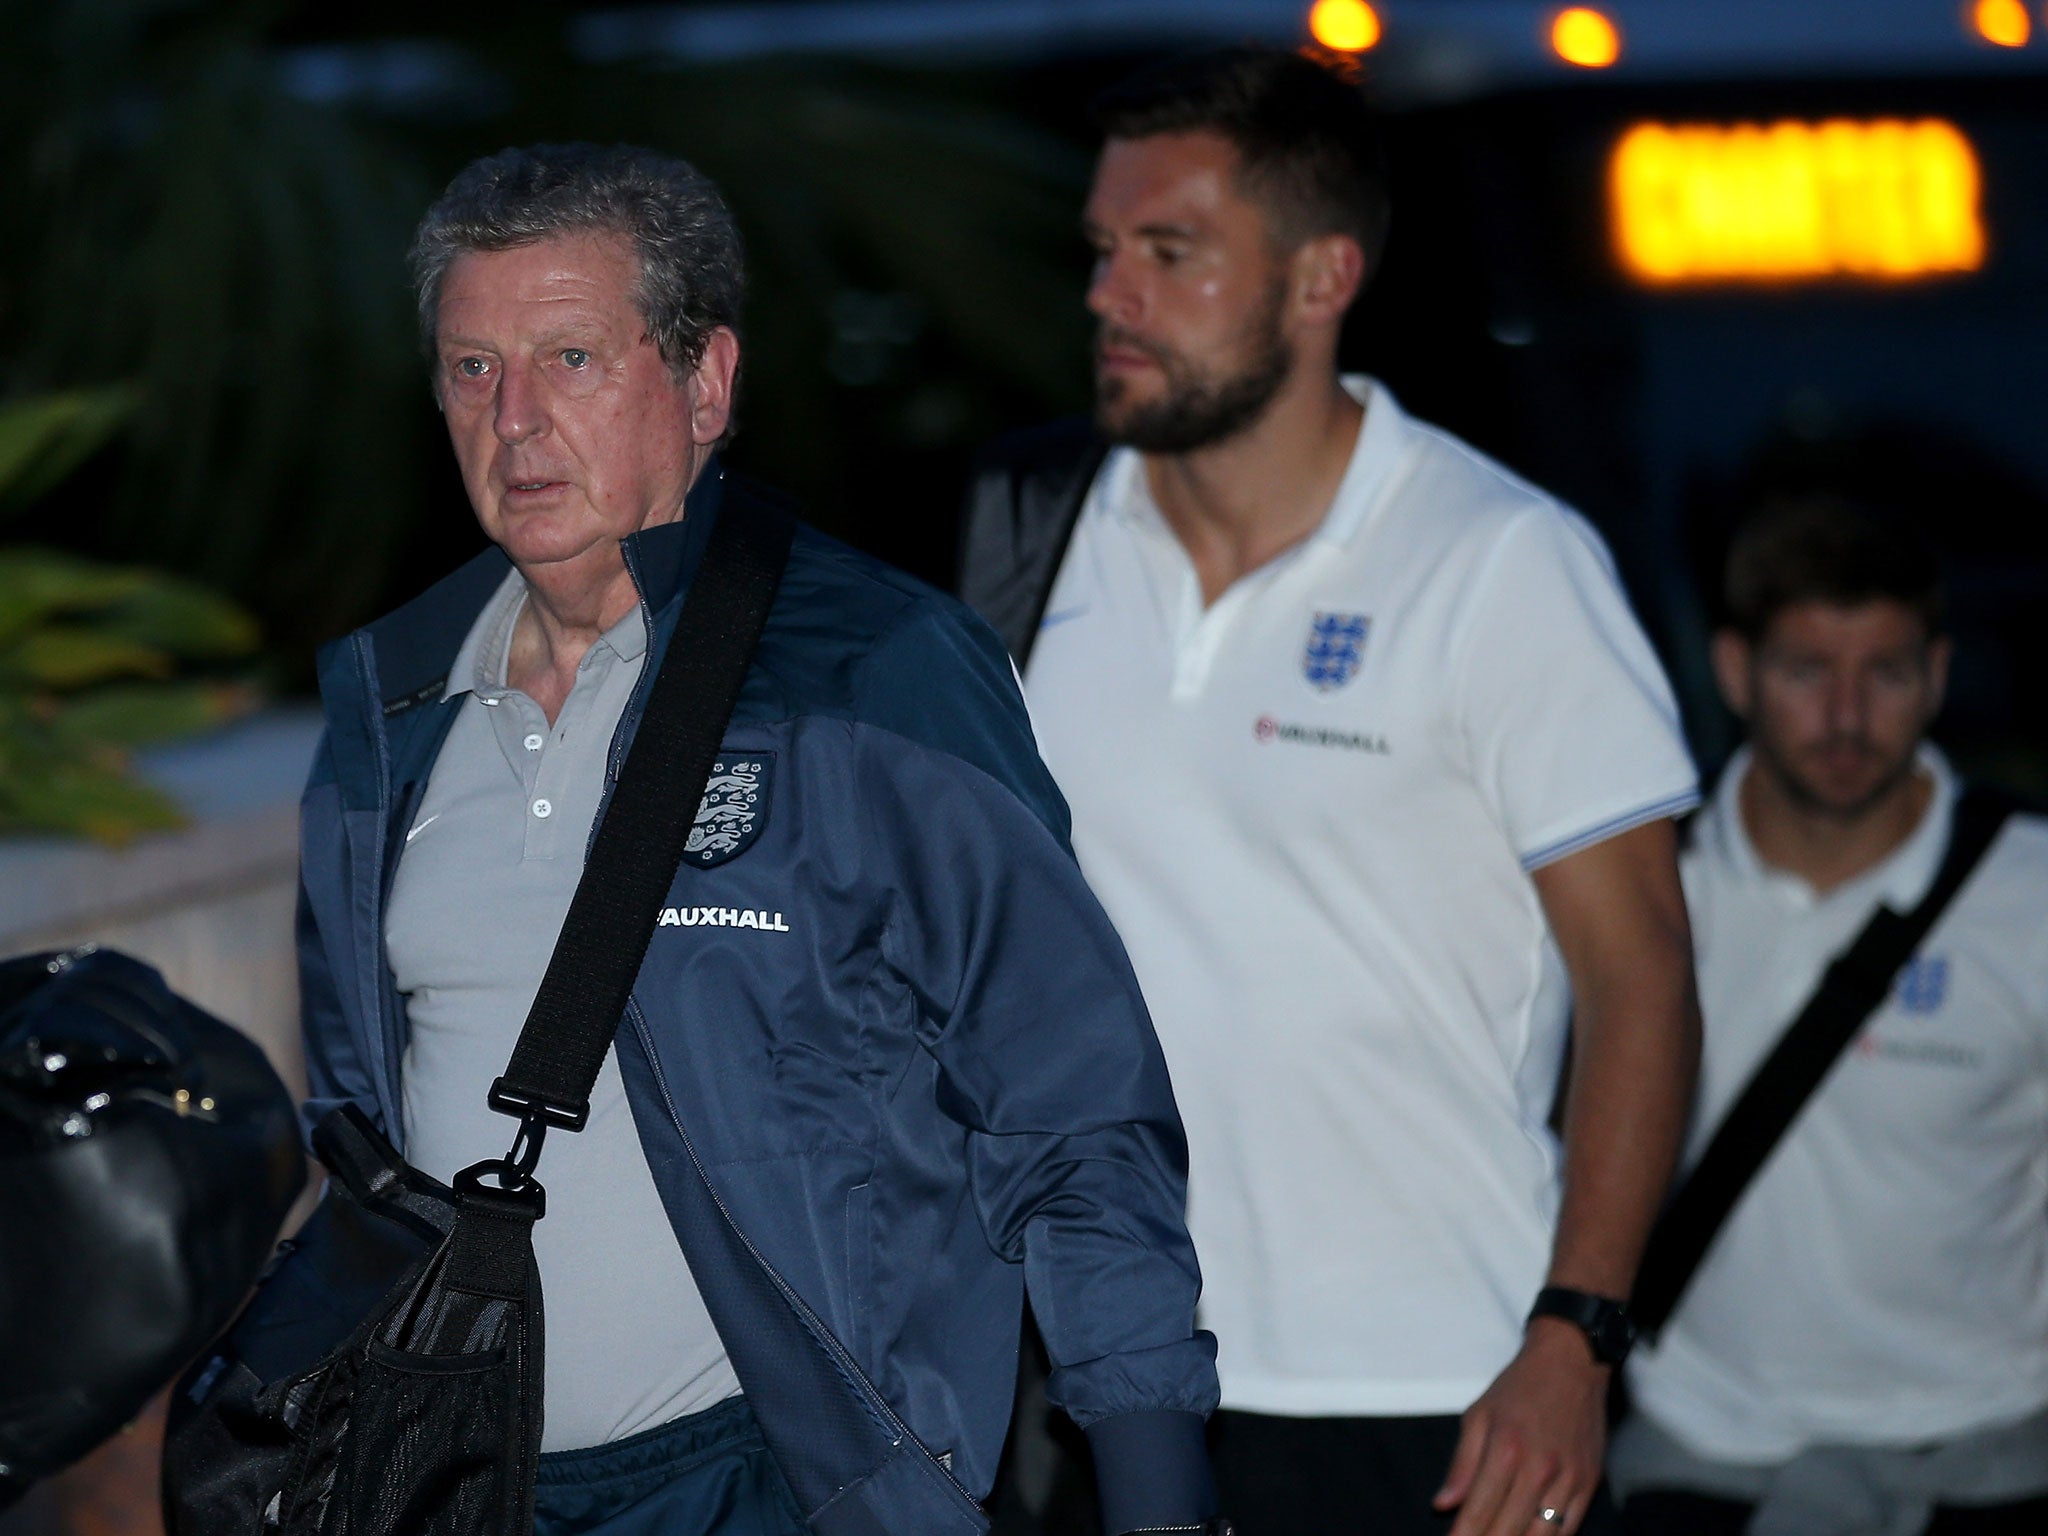 Roy Hodgson and the England squad arrive in Miami for their pre-World Cup warm up matches against Ecuador and Honduras